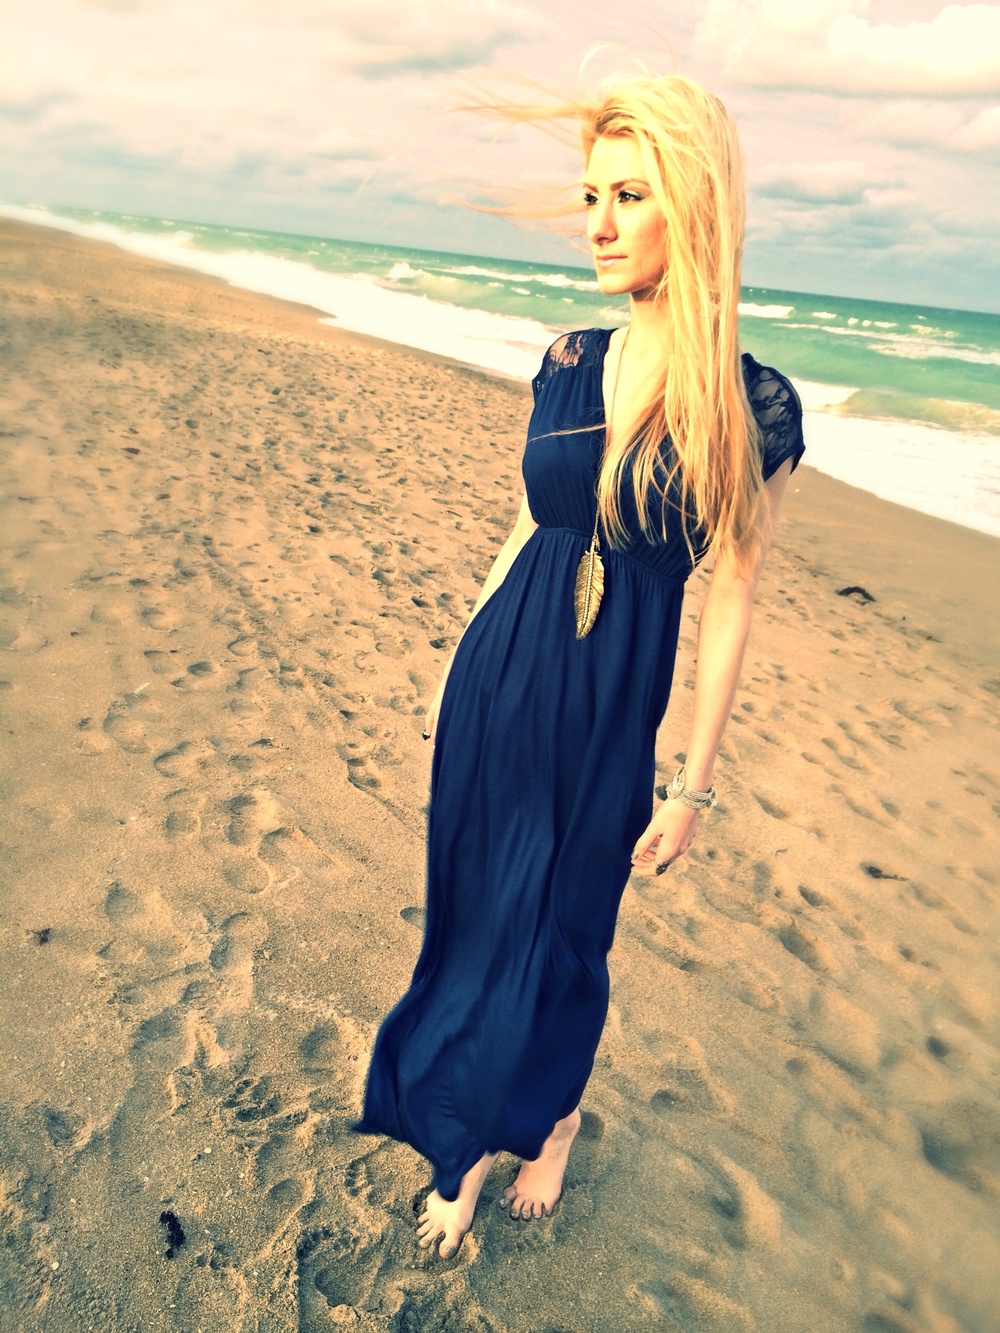 North Carolina fashion and lifestyle blogger Jessica Linn wearing a navy blue maxi dress, silver sandals, an da feather pendant necklace on a beach in Florida.